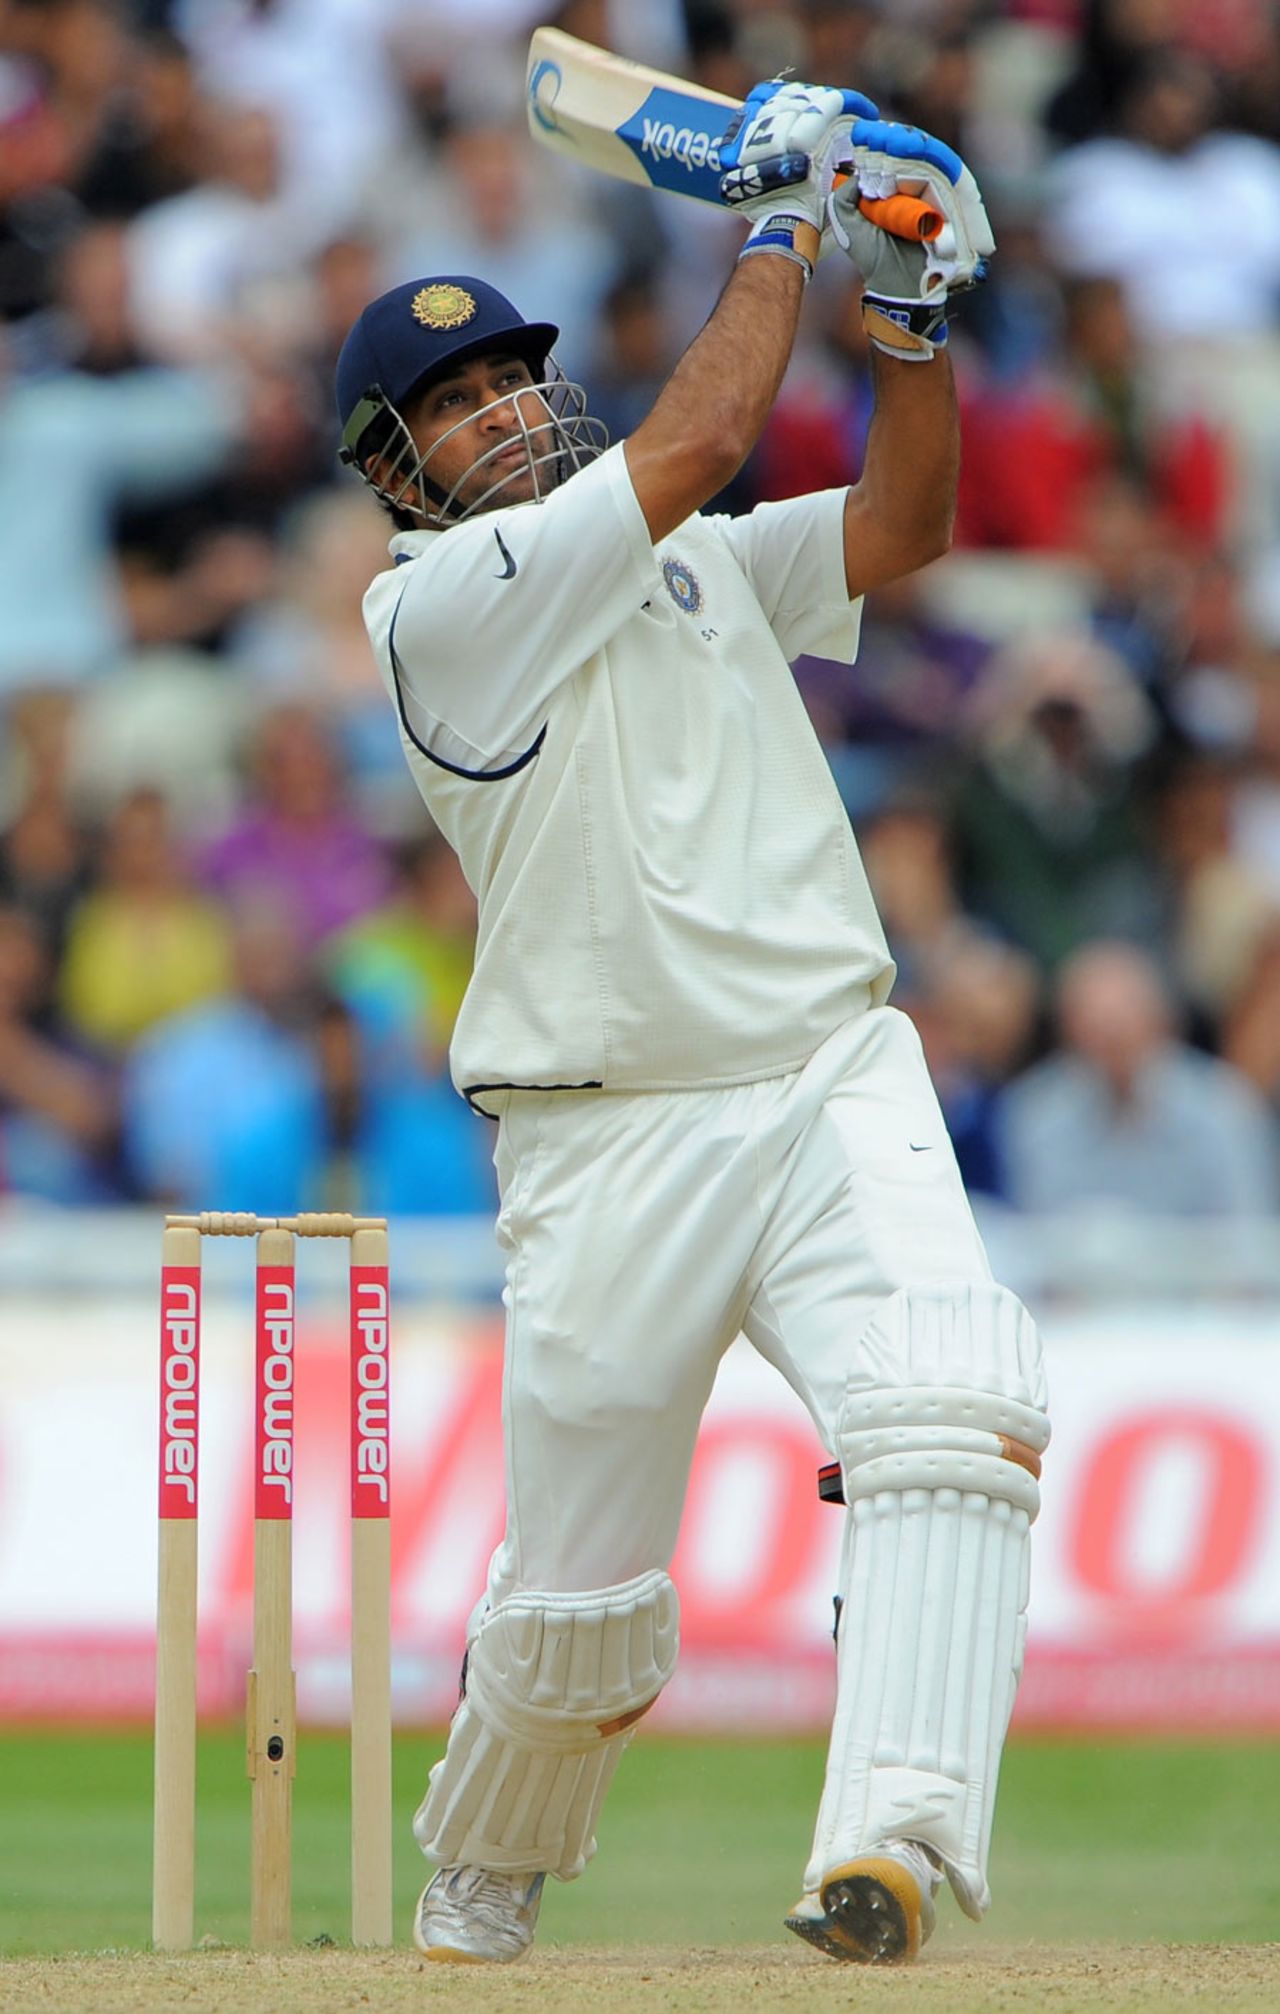 MS Dhoni made an aggressive half-century, England v India, 3rd Test, Edgbaston, 4th day, August 13, 2011